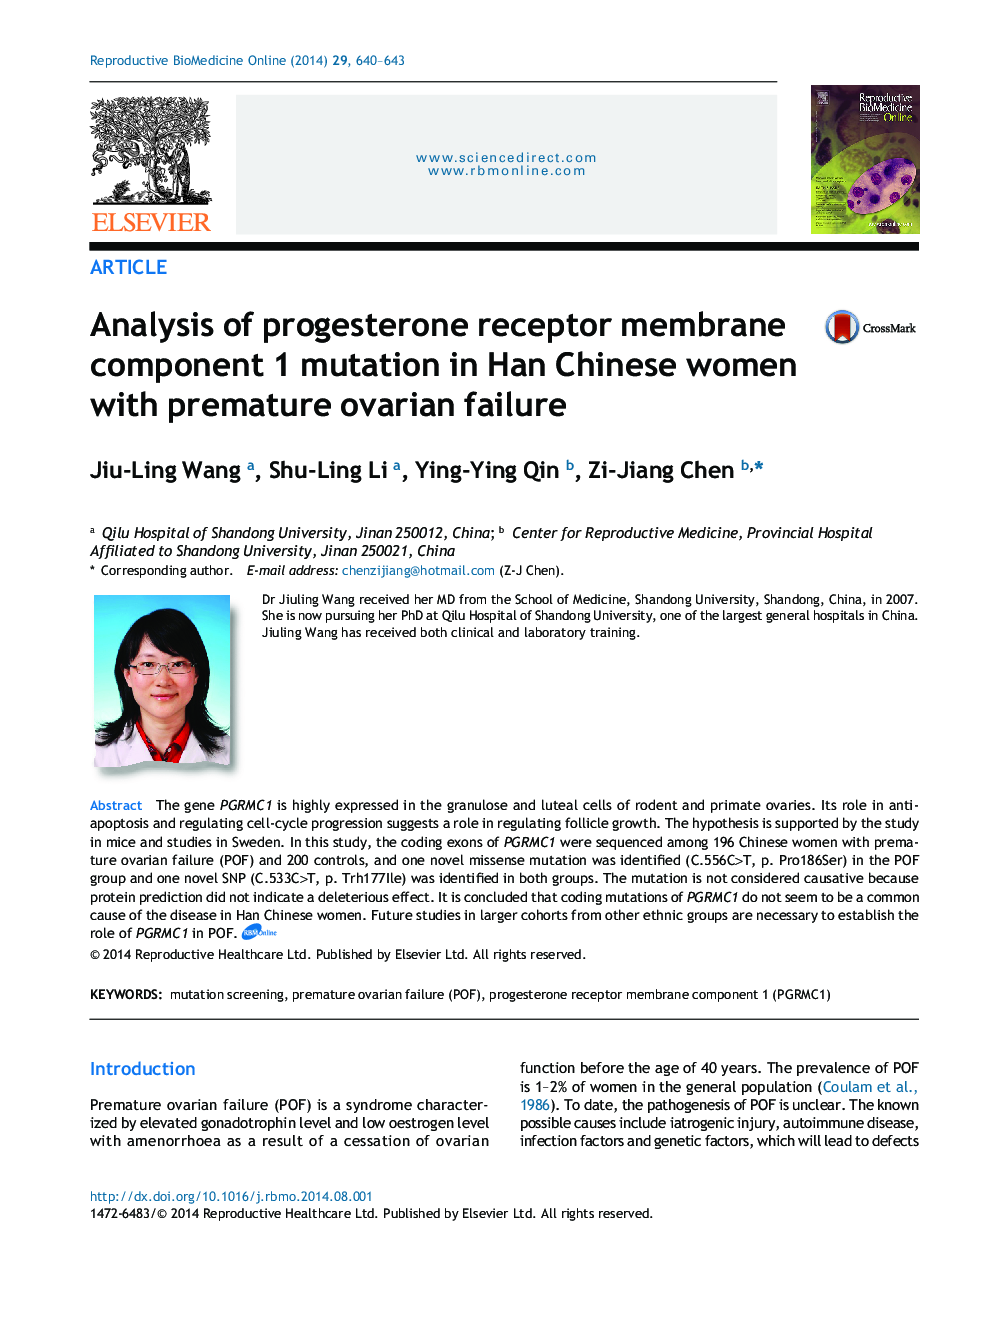 Analysis of progesterone receptor membrane component 1 mutation in Han Chinese women with premature ovarian failure